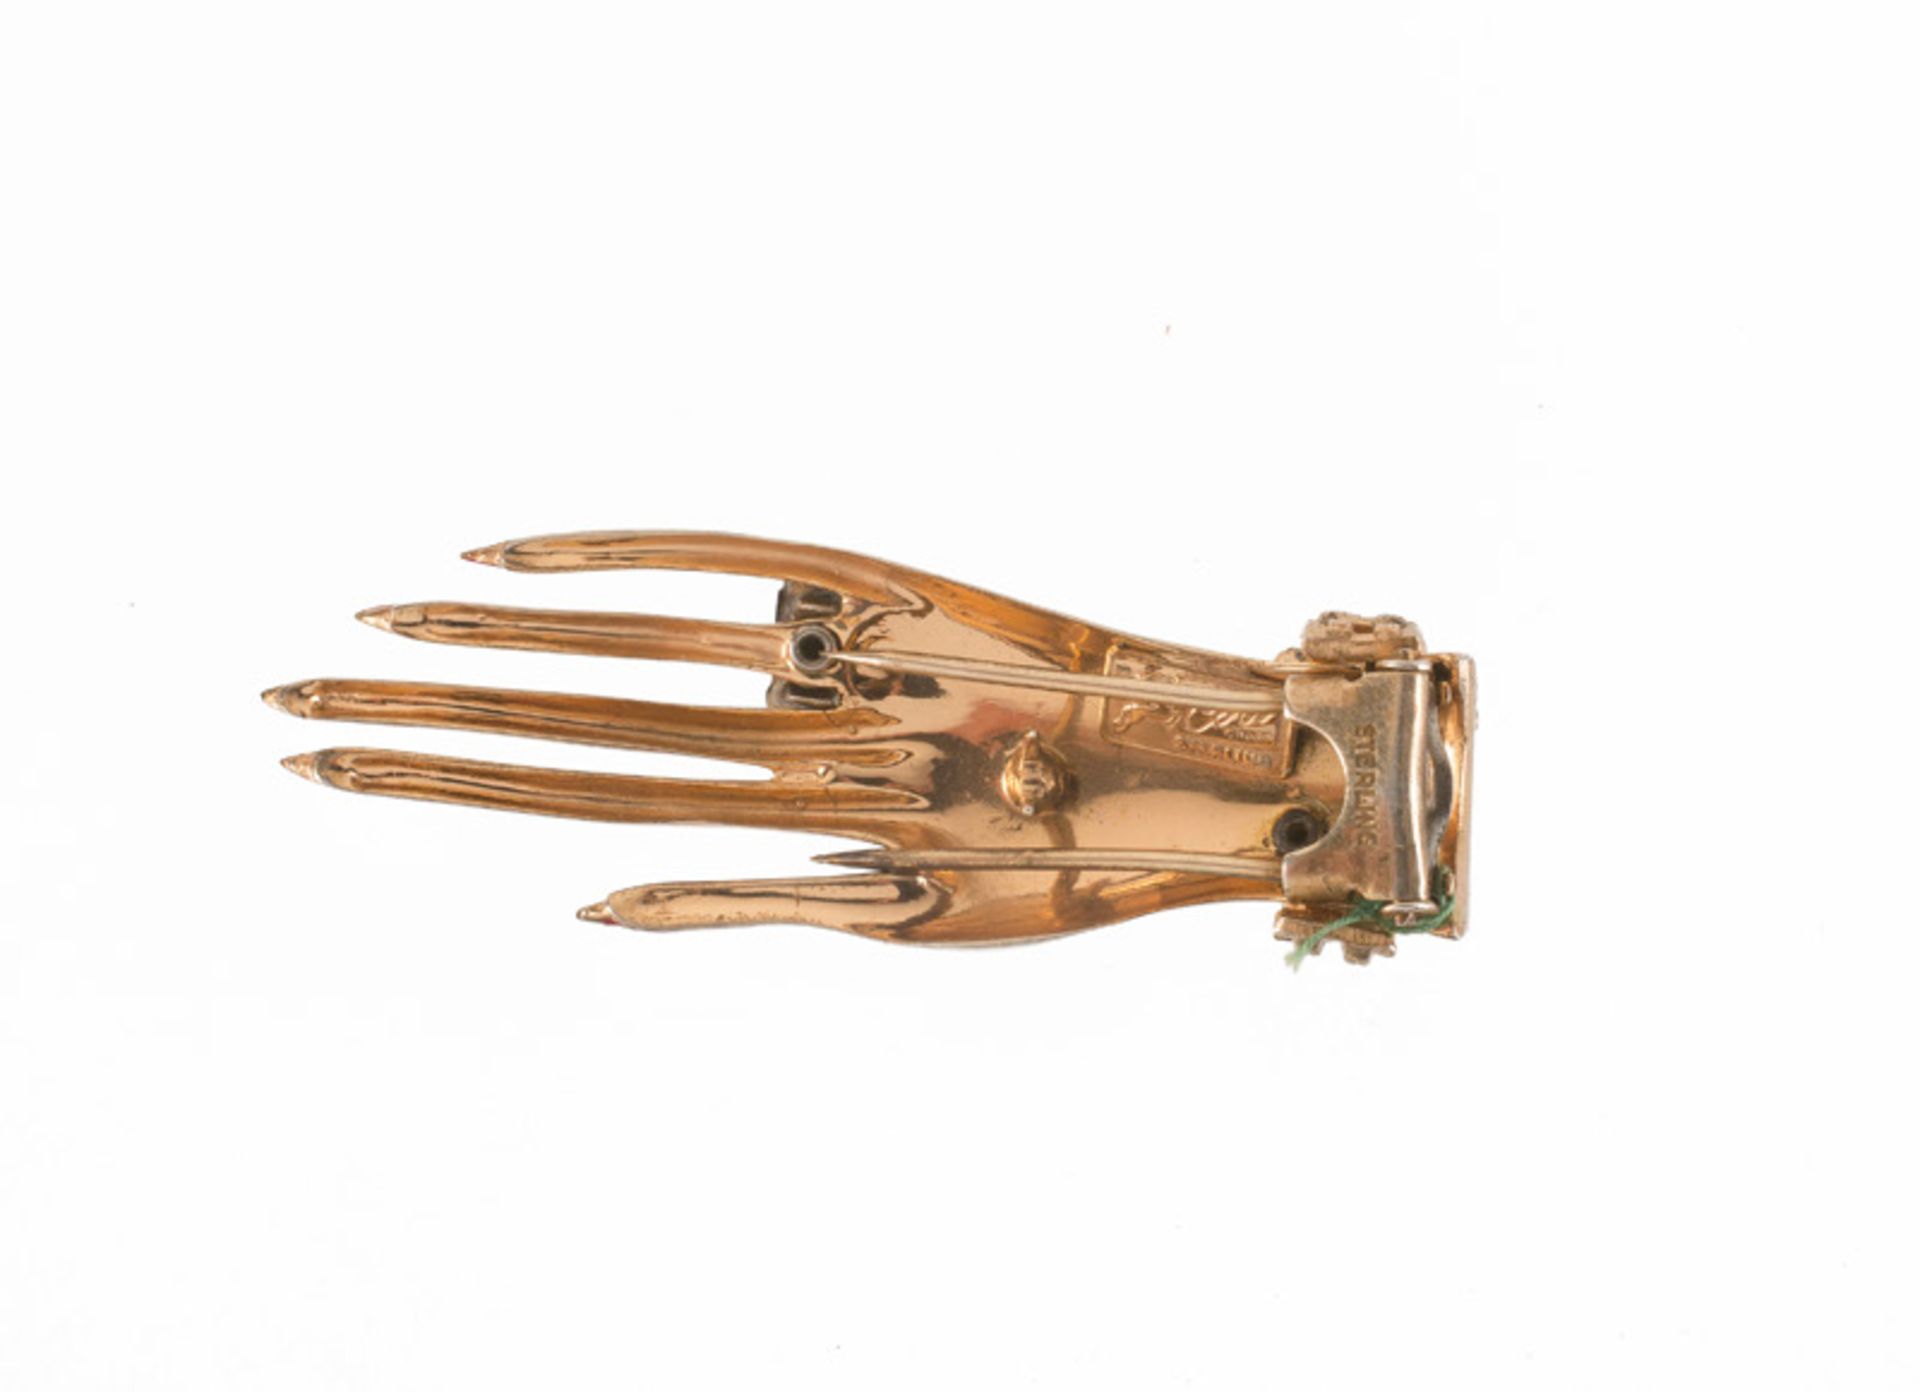 A Coro sterling goldtone brooch in the shape of a hand, wearing a ring. Set with yellow stones, - Image 2 of 3